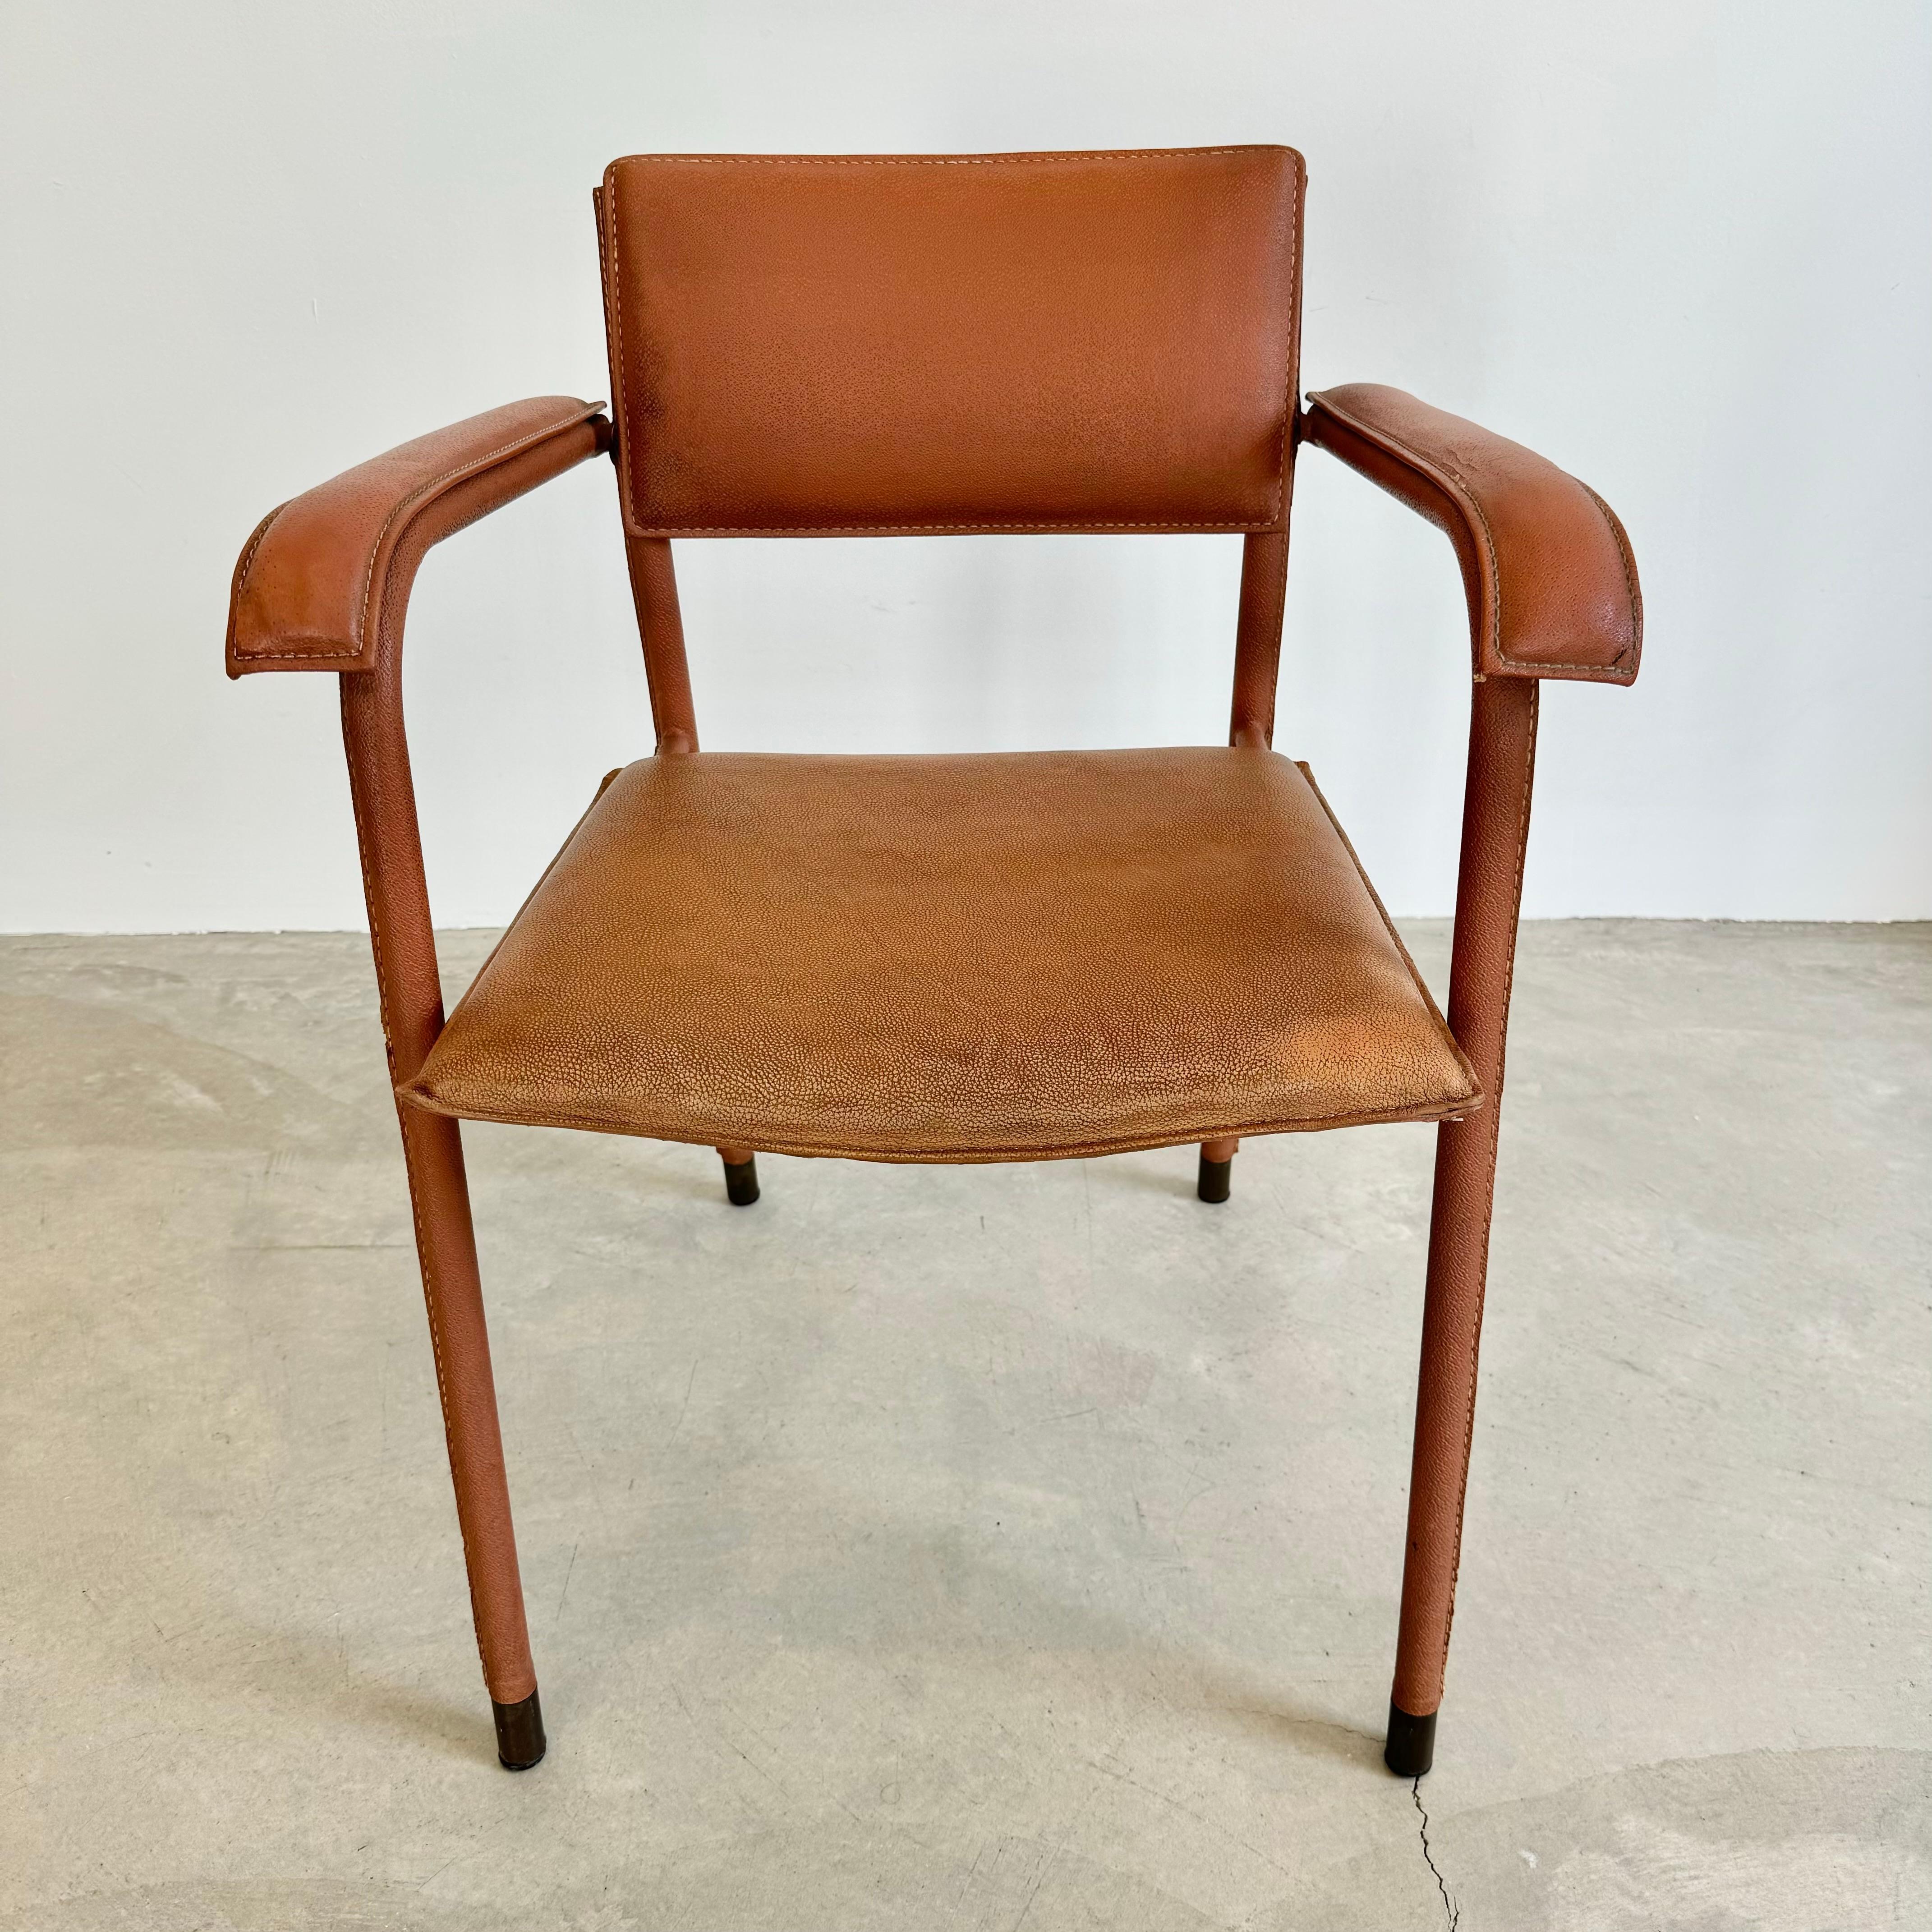 Jacques Adnet Leather Armchair, 1950s France For Sale 5